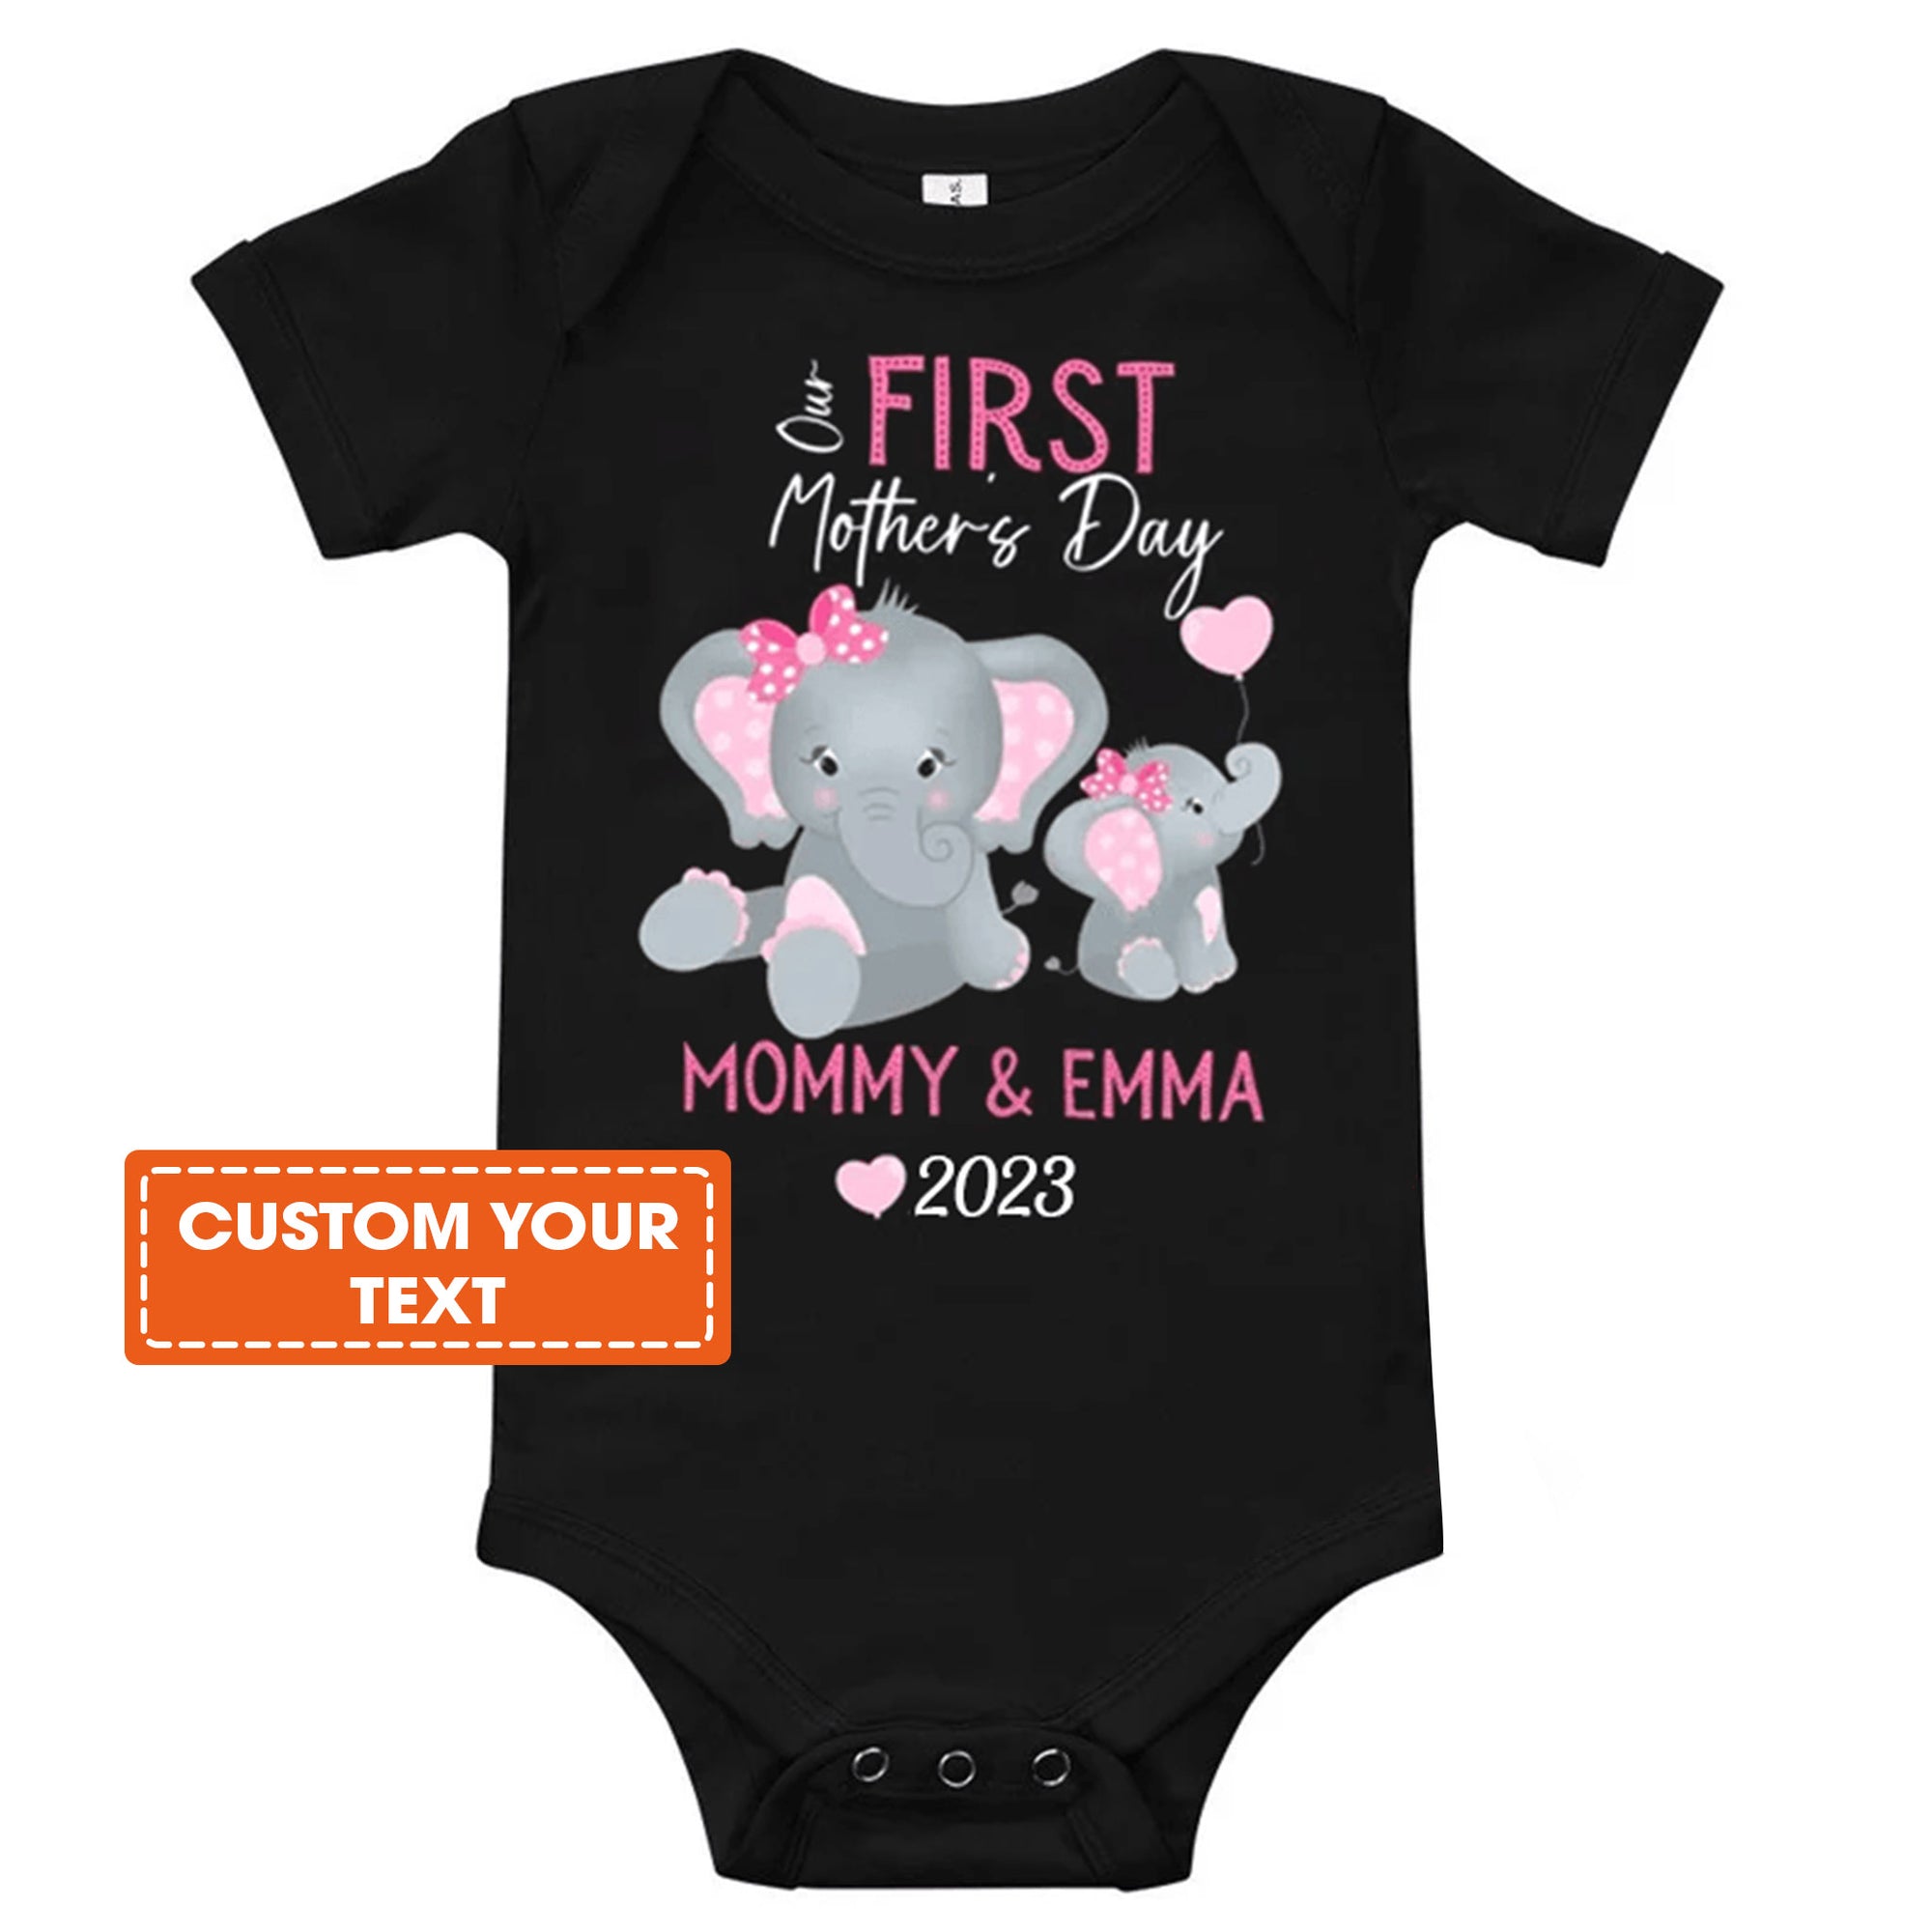 Elephant Baby Onesies, Baby Onesie Our First Mother'S Day Cute Elephant Printed Custom Name Personalized Onesies, Newborn Onesies - Perfect Gift For Baby, Baby Gift Onesie